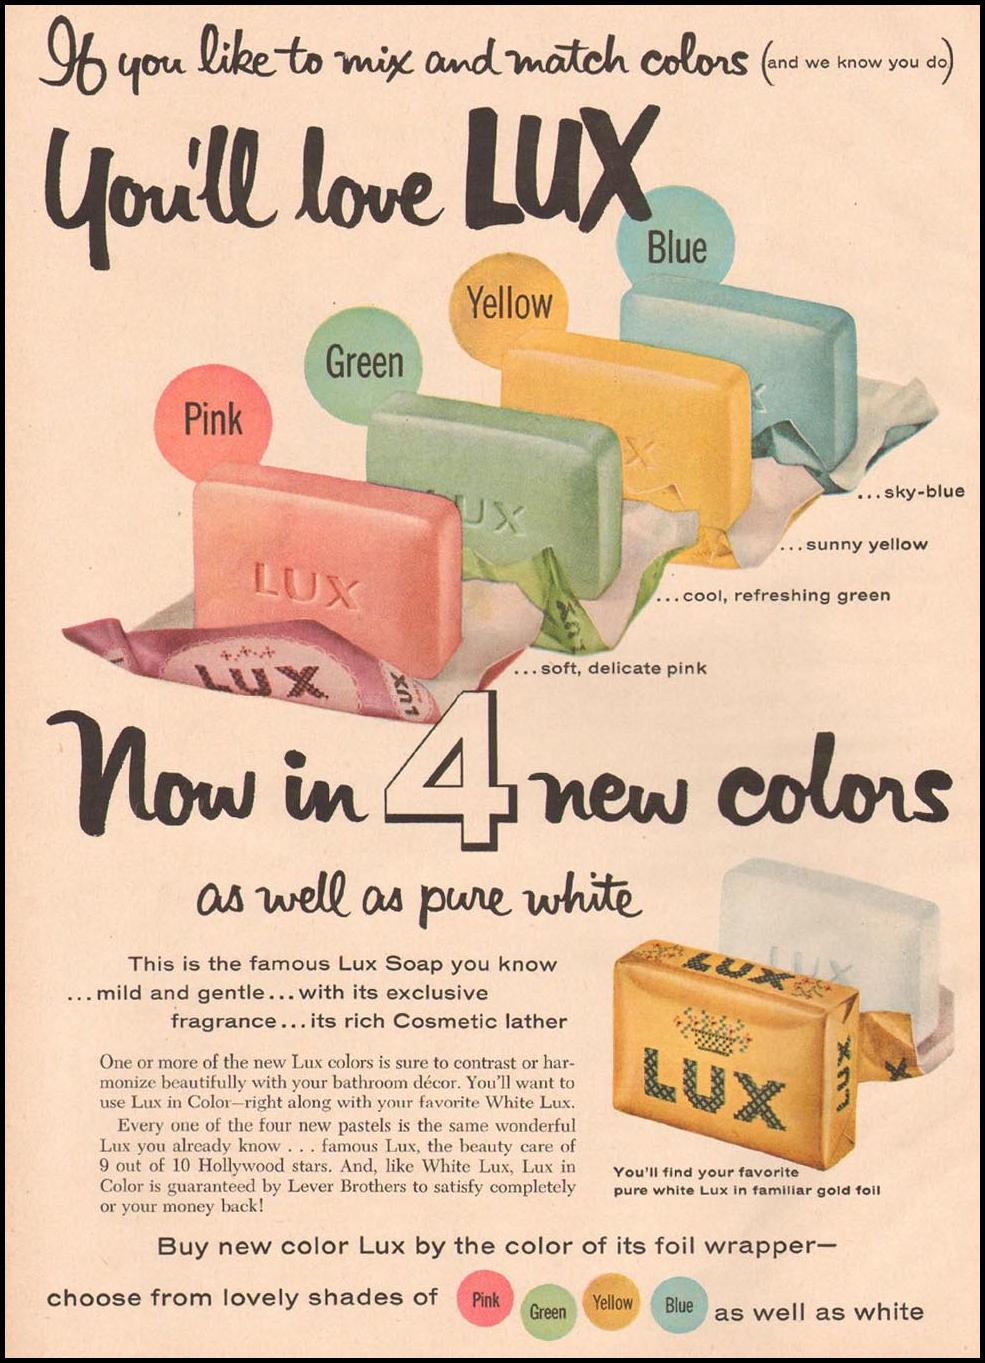 LUX SOAP
GOOD HOUSEKEEPING
05/01/1957